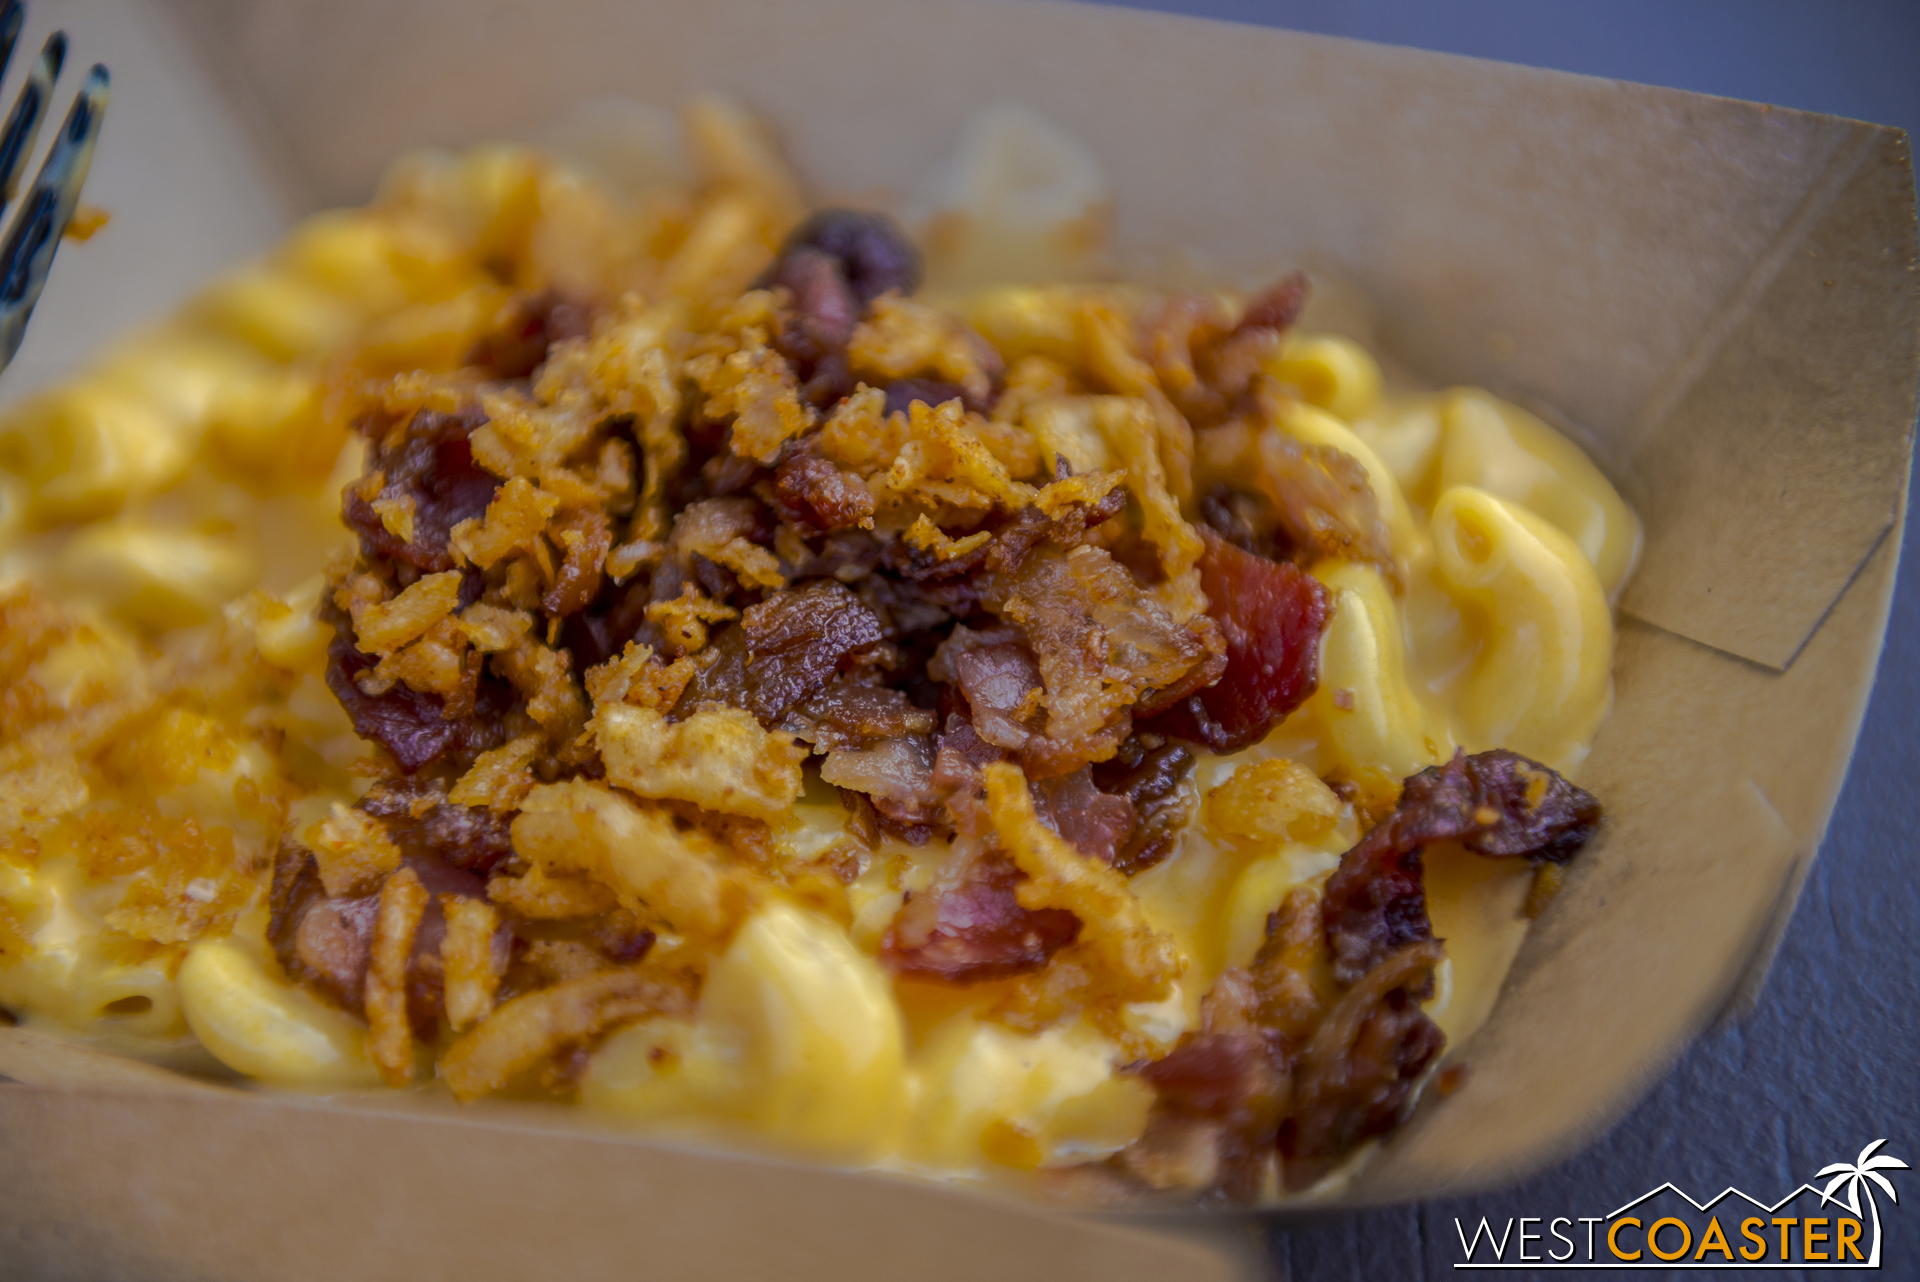  From Bacon Twist:  Smoked Bacon Mac and Cheese  with Barbecue-seasoned Crispy Onions ($7.50) 